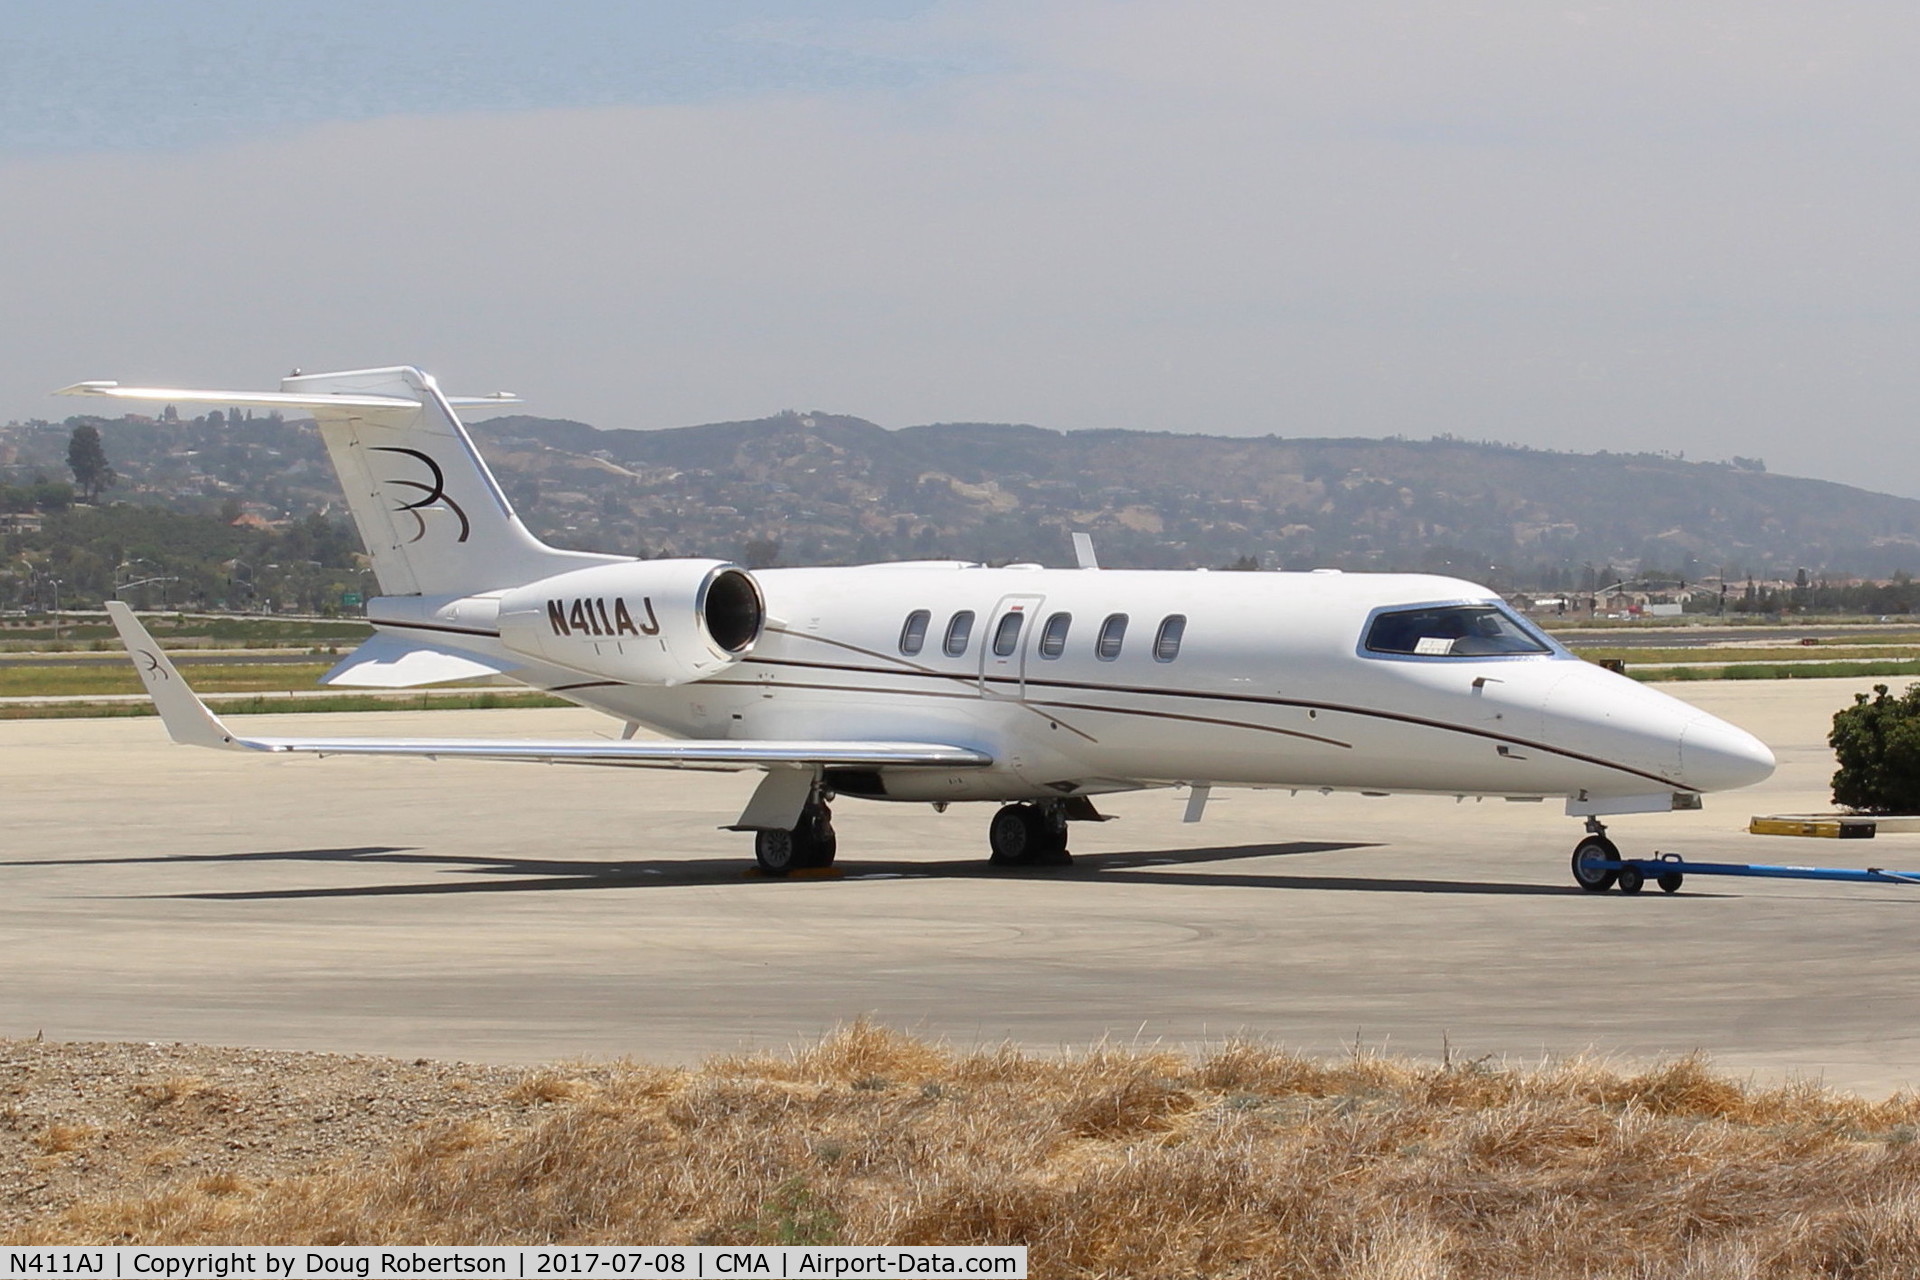 N411AJ, 2004 Learjet 40 C/N 40-2011, 2004 Bombardier Aerospace Learjet 45, 2 Honeywell TFE731-20-1B turbofans each flat rated at 3,500 lb st, with FADEC, T-tail, winglets. On SUN AIR ramp. All data from my 2003-2004 Jane's All The World's Aircraft. Please correct aircraft builder. 